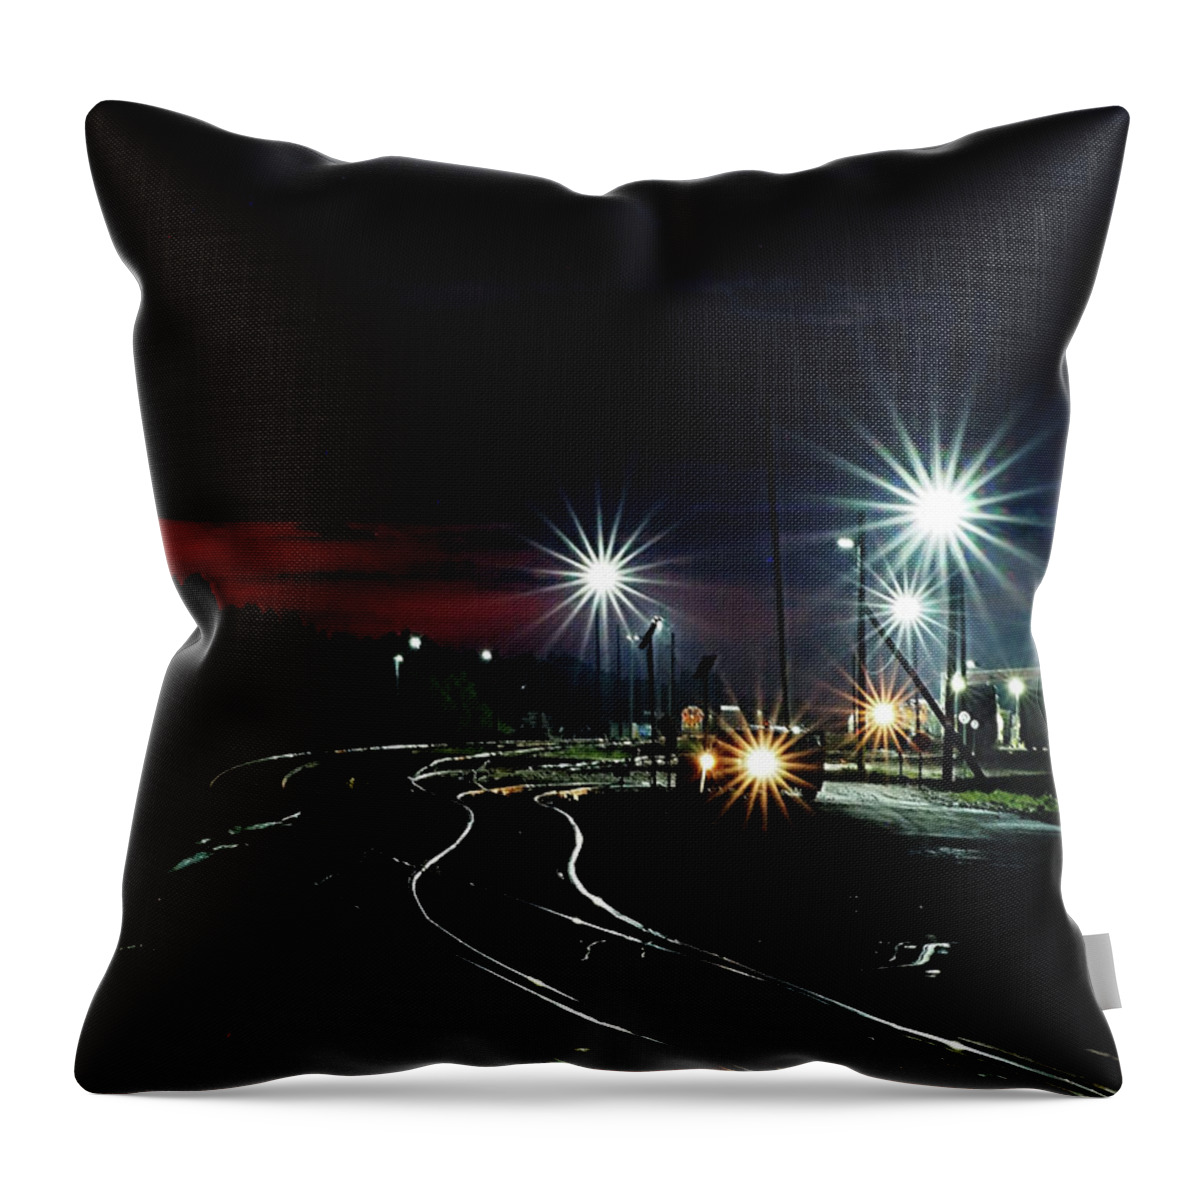 Train Tracks Throw Pillow featuring the photograph The Tracks by Jerry Connally